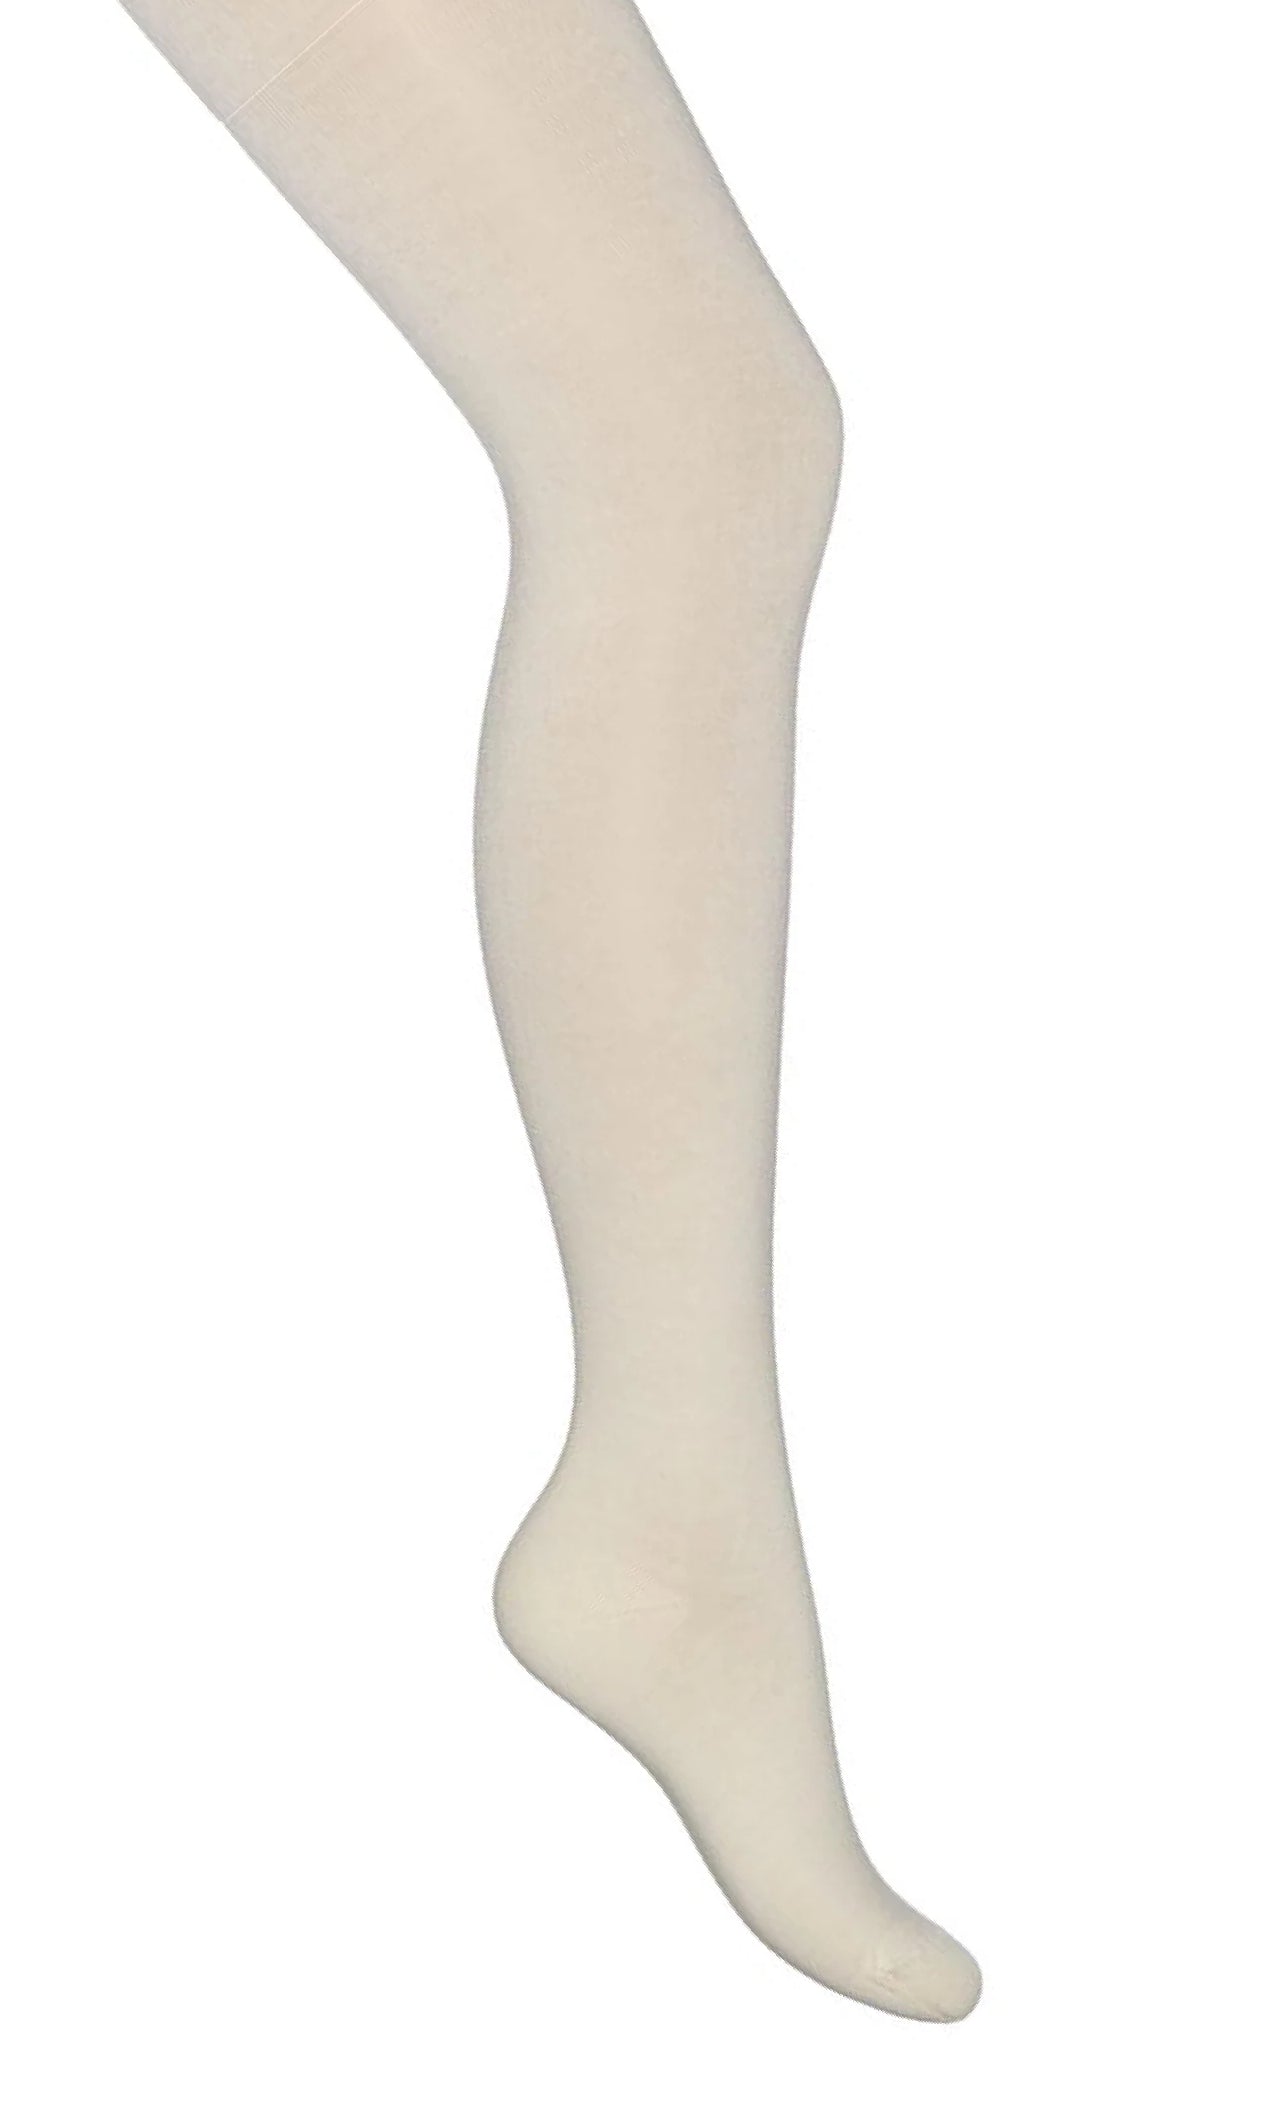 Bonnie Doon Cotton Tights - cream knitted Winter thermal warm tights